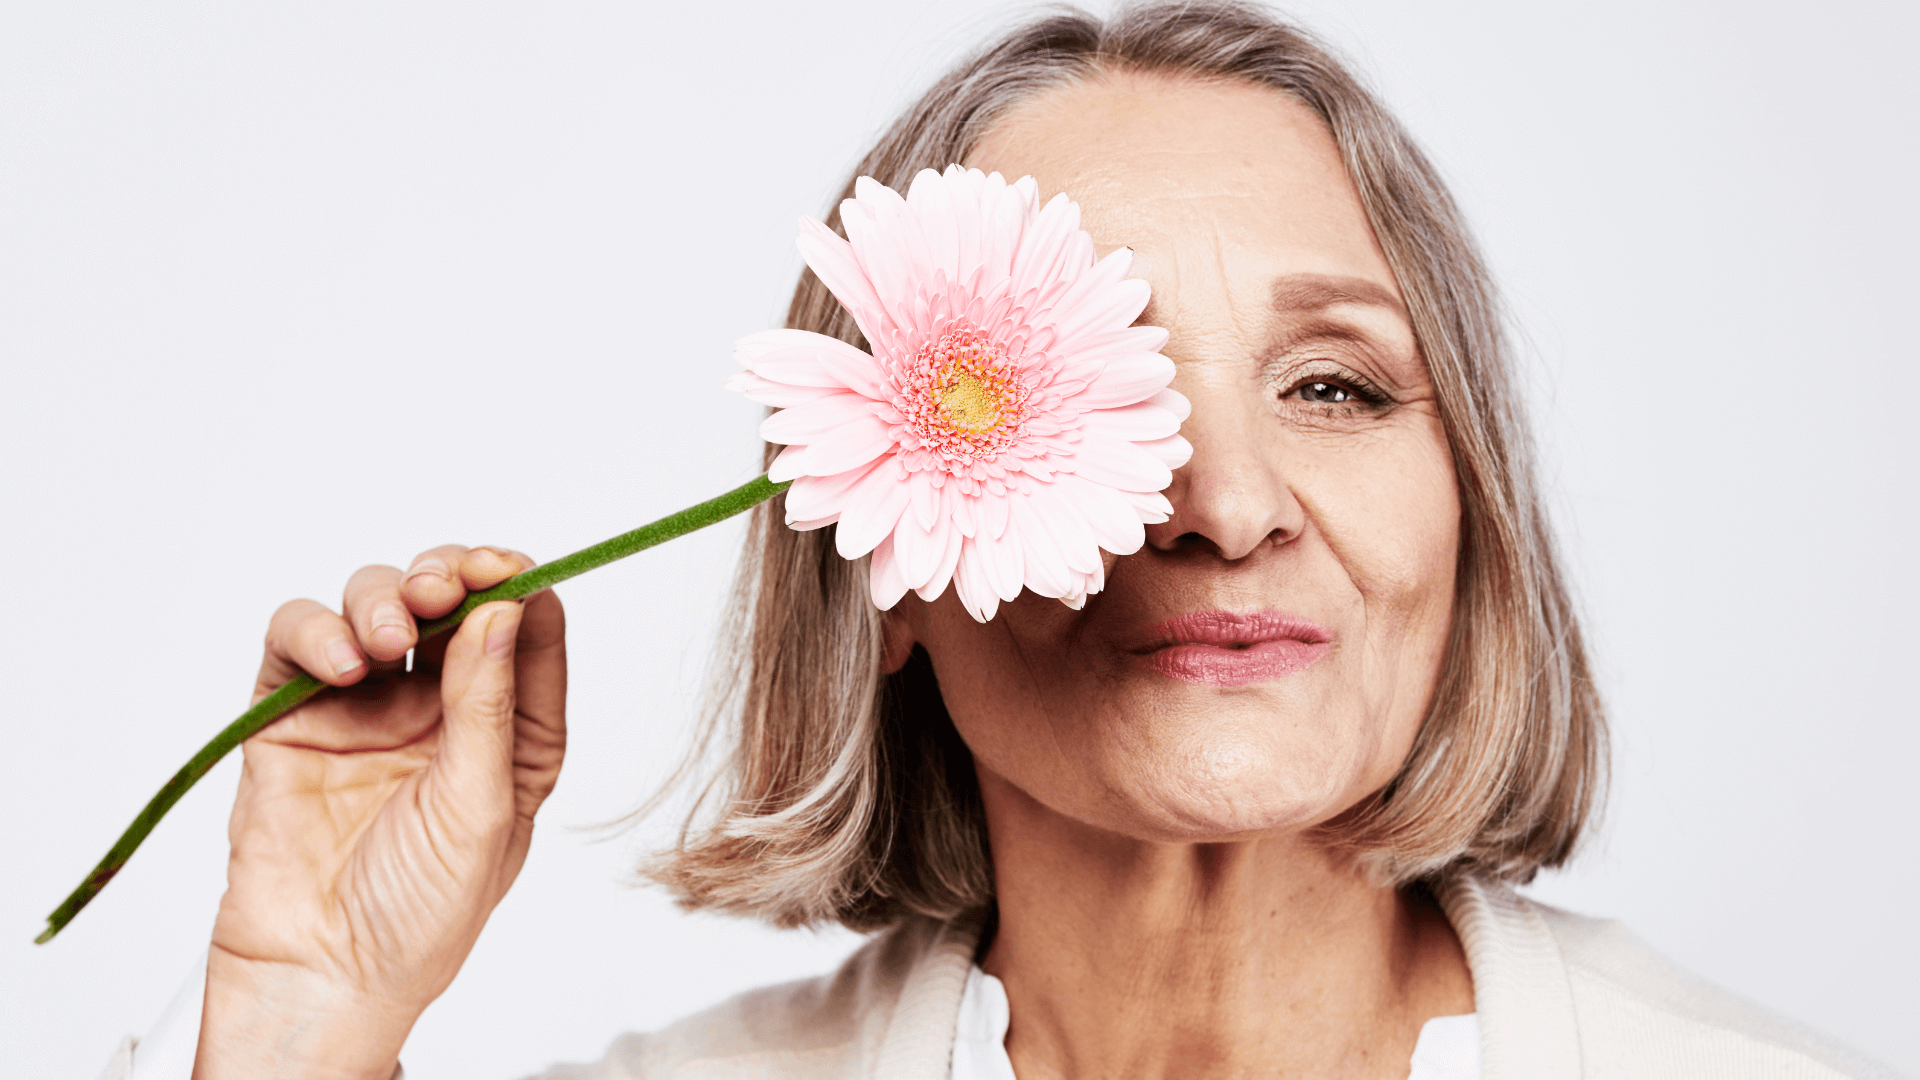 Can we delay menopause, or eliminate it altogether?